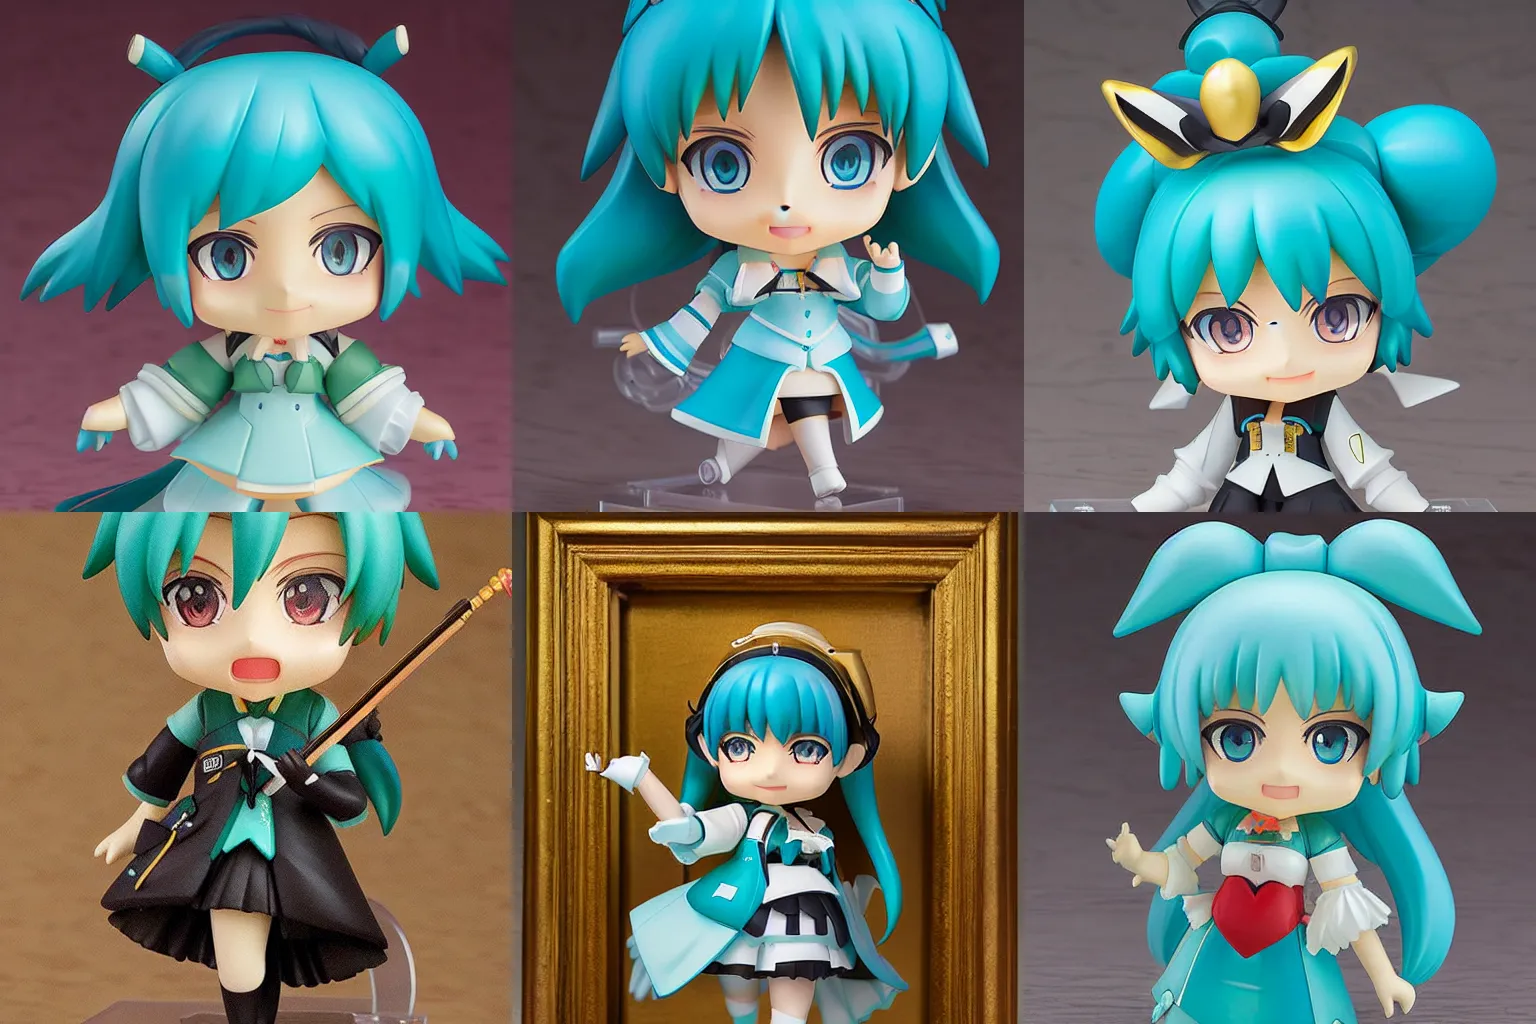 Prompt: a painting of a Hatsune Miku Nendoroid by Rembrandt, a painting of a Hatsune Miku Nendoroid by Rembrandt, a painting of a Hatsune Miku Nendoroid by Rembrandt, a painting of a Hatsune Miku Nendoroid by Rembrandt, a painting of a Hatsune Miku Nendoroid by Rembrandt, a painting of a Hatsune Miku Nendoroid by Rembrandt, a painting of a Hatsune Miku Nendoroid by Rembrandt, a painting of a Hatsune Miku Nendoroid by Rembrandt, a painting of a Hatsune Miku Nendoroid by Rembrandt,